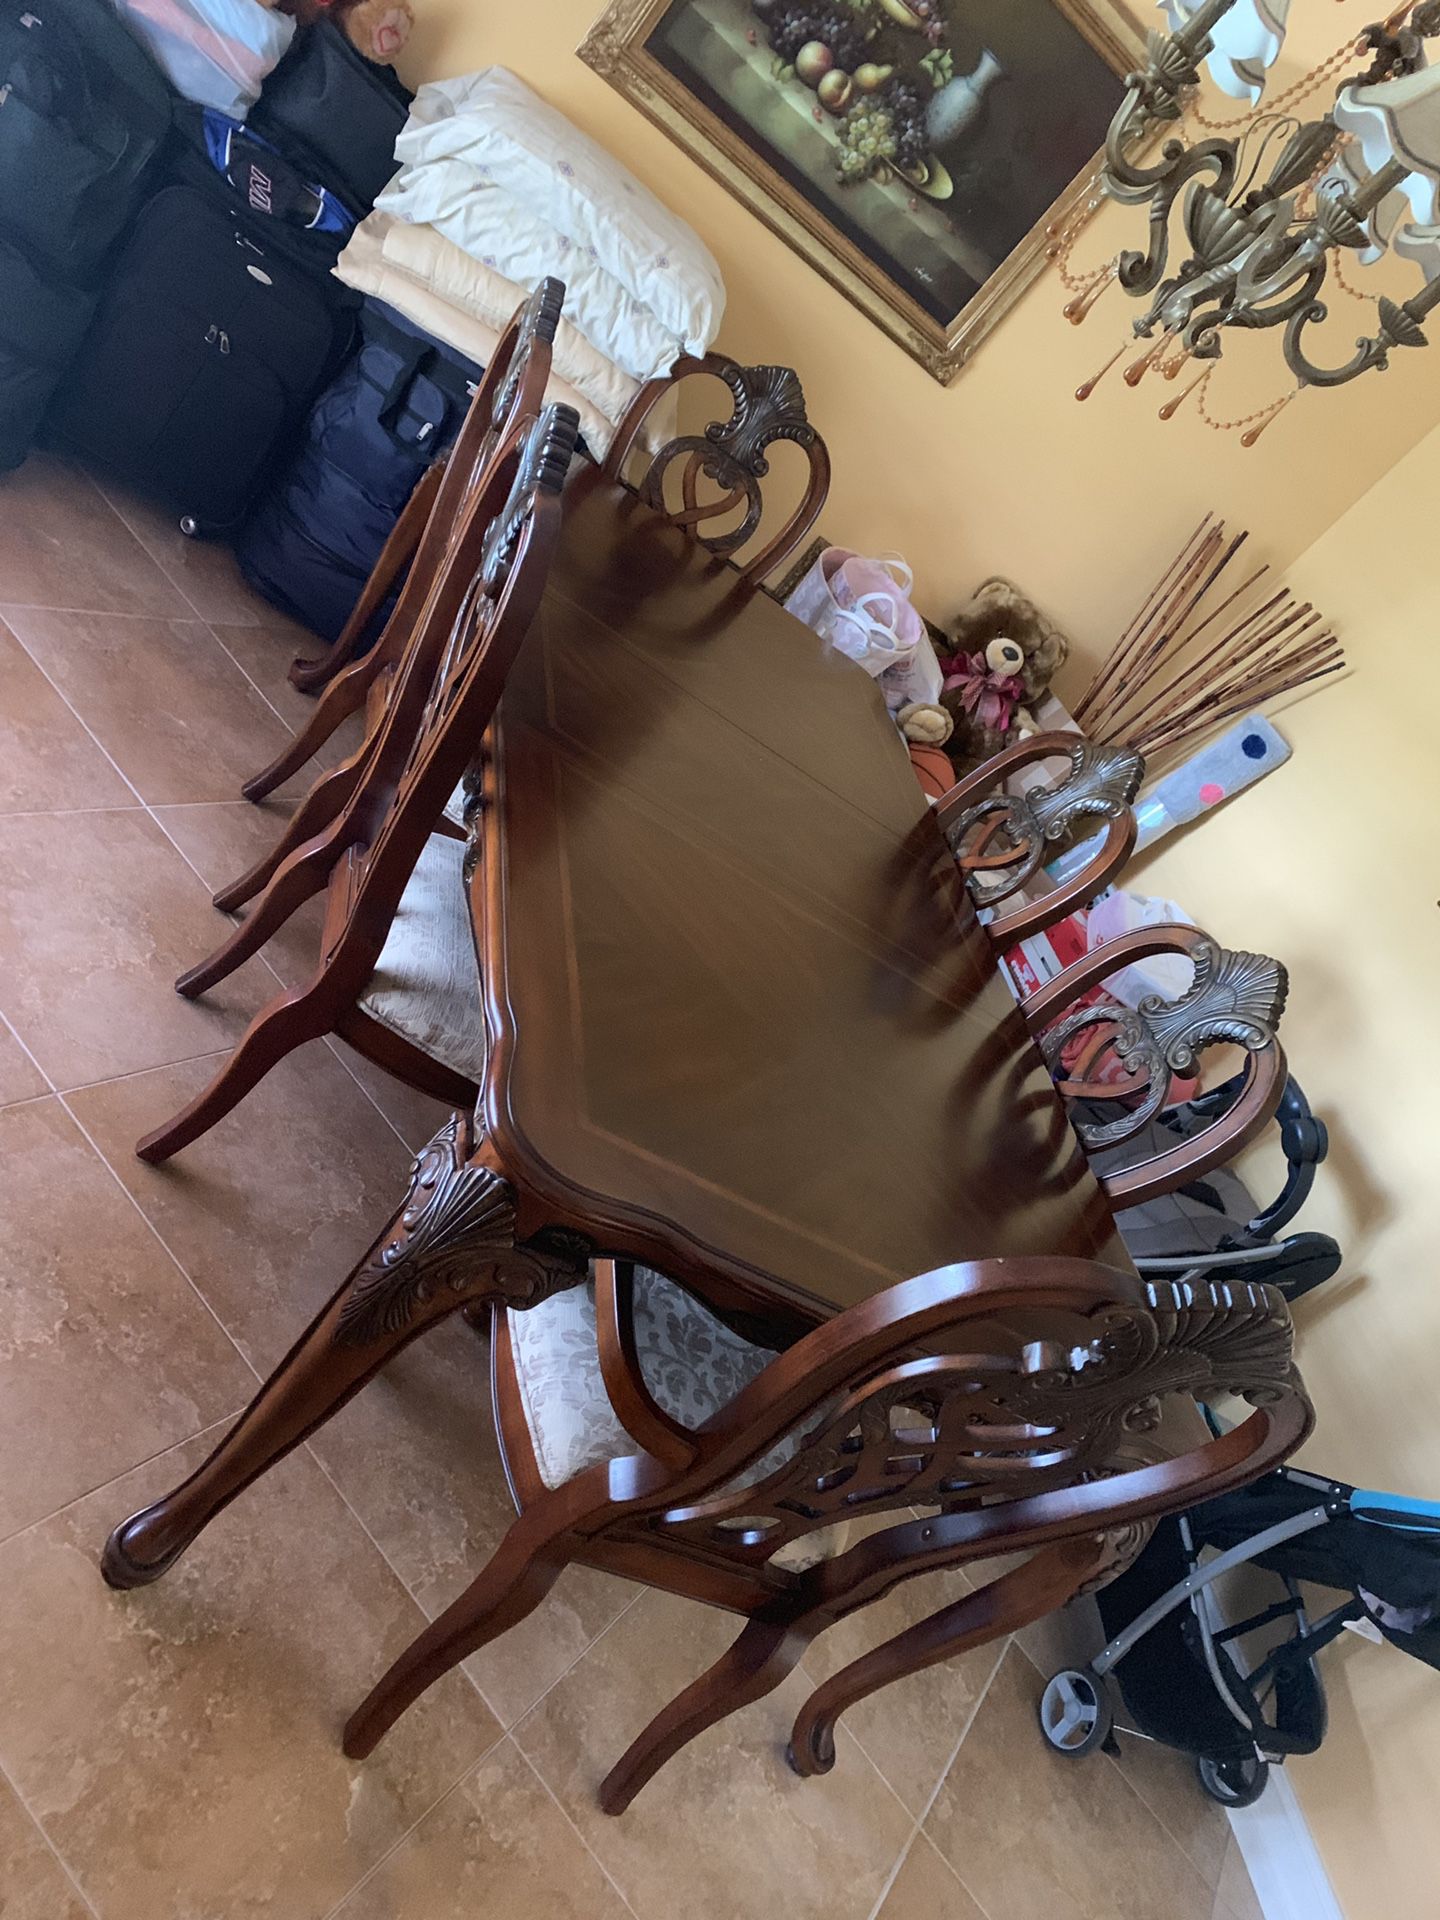 Dinning table with 6 chairs excellent condition